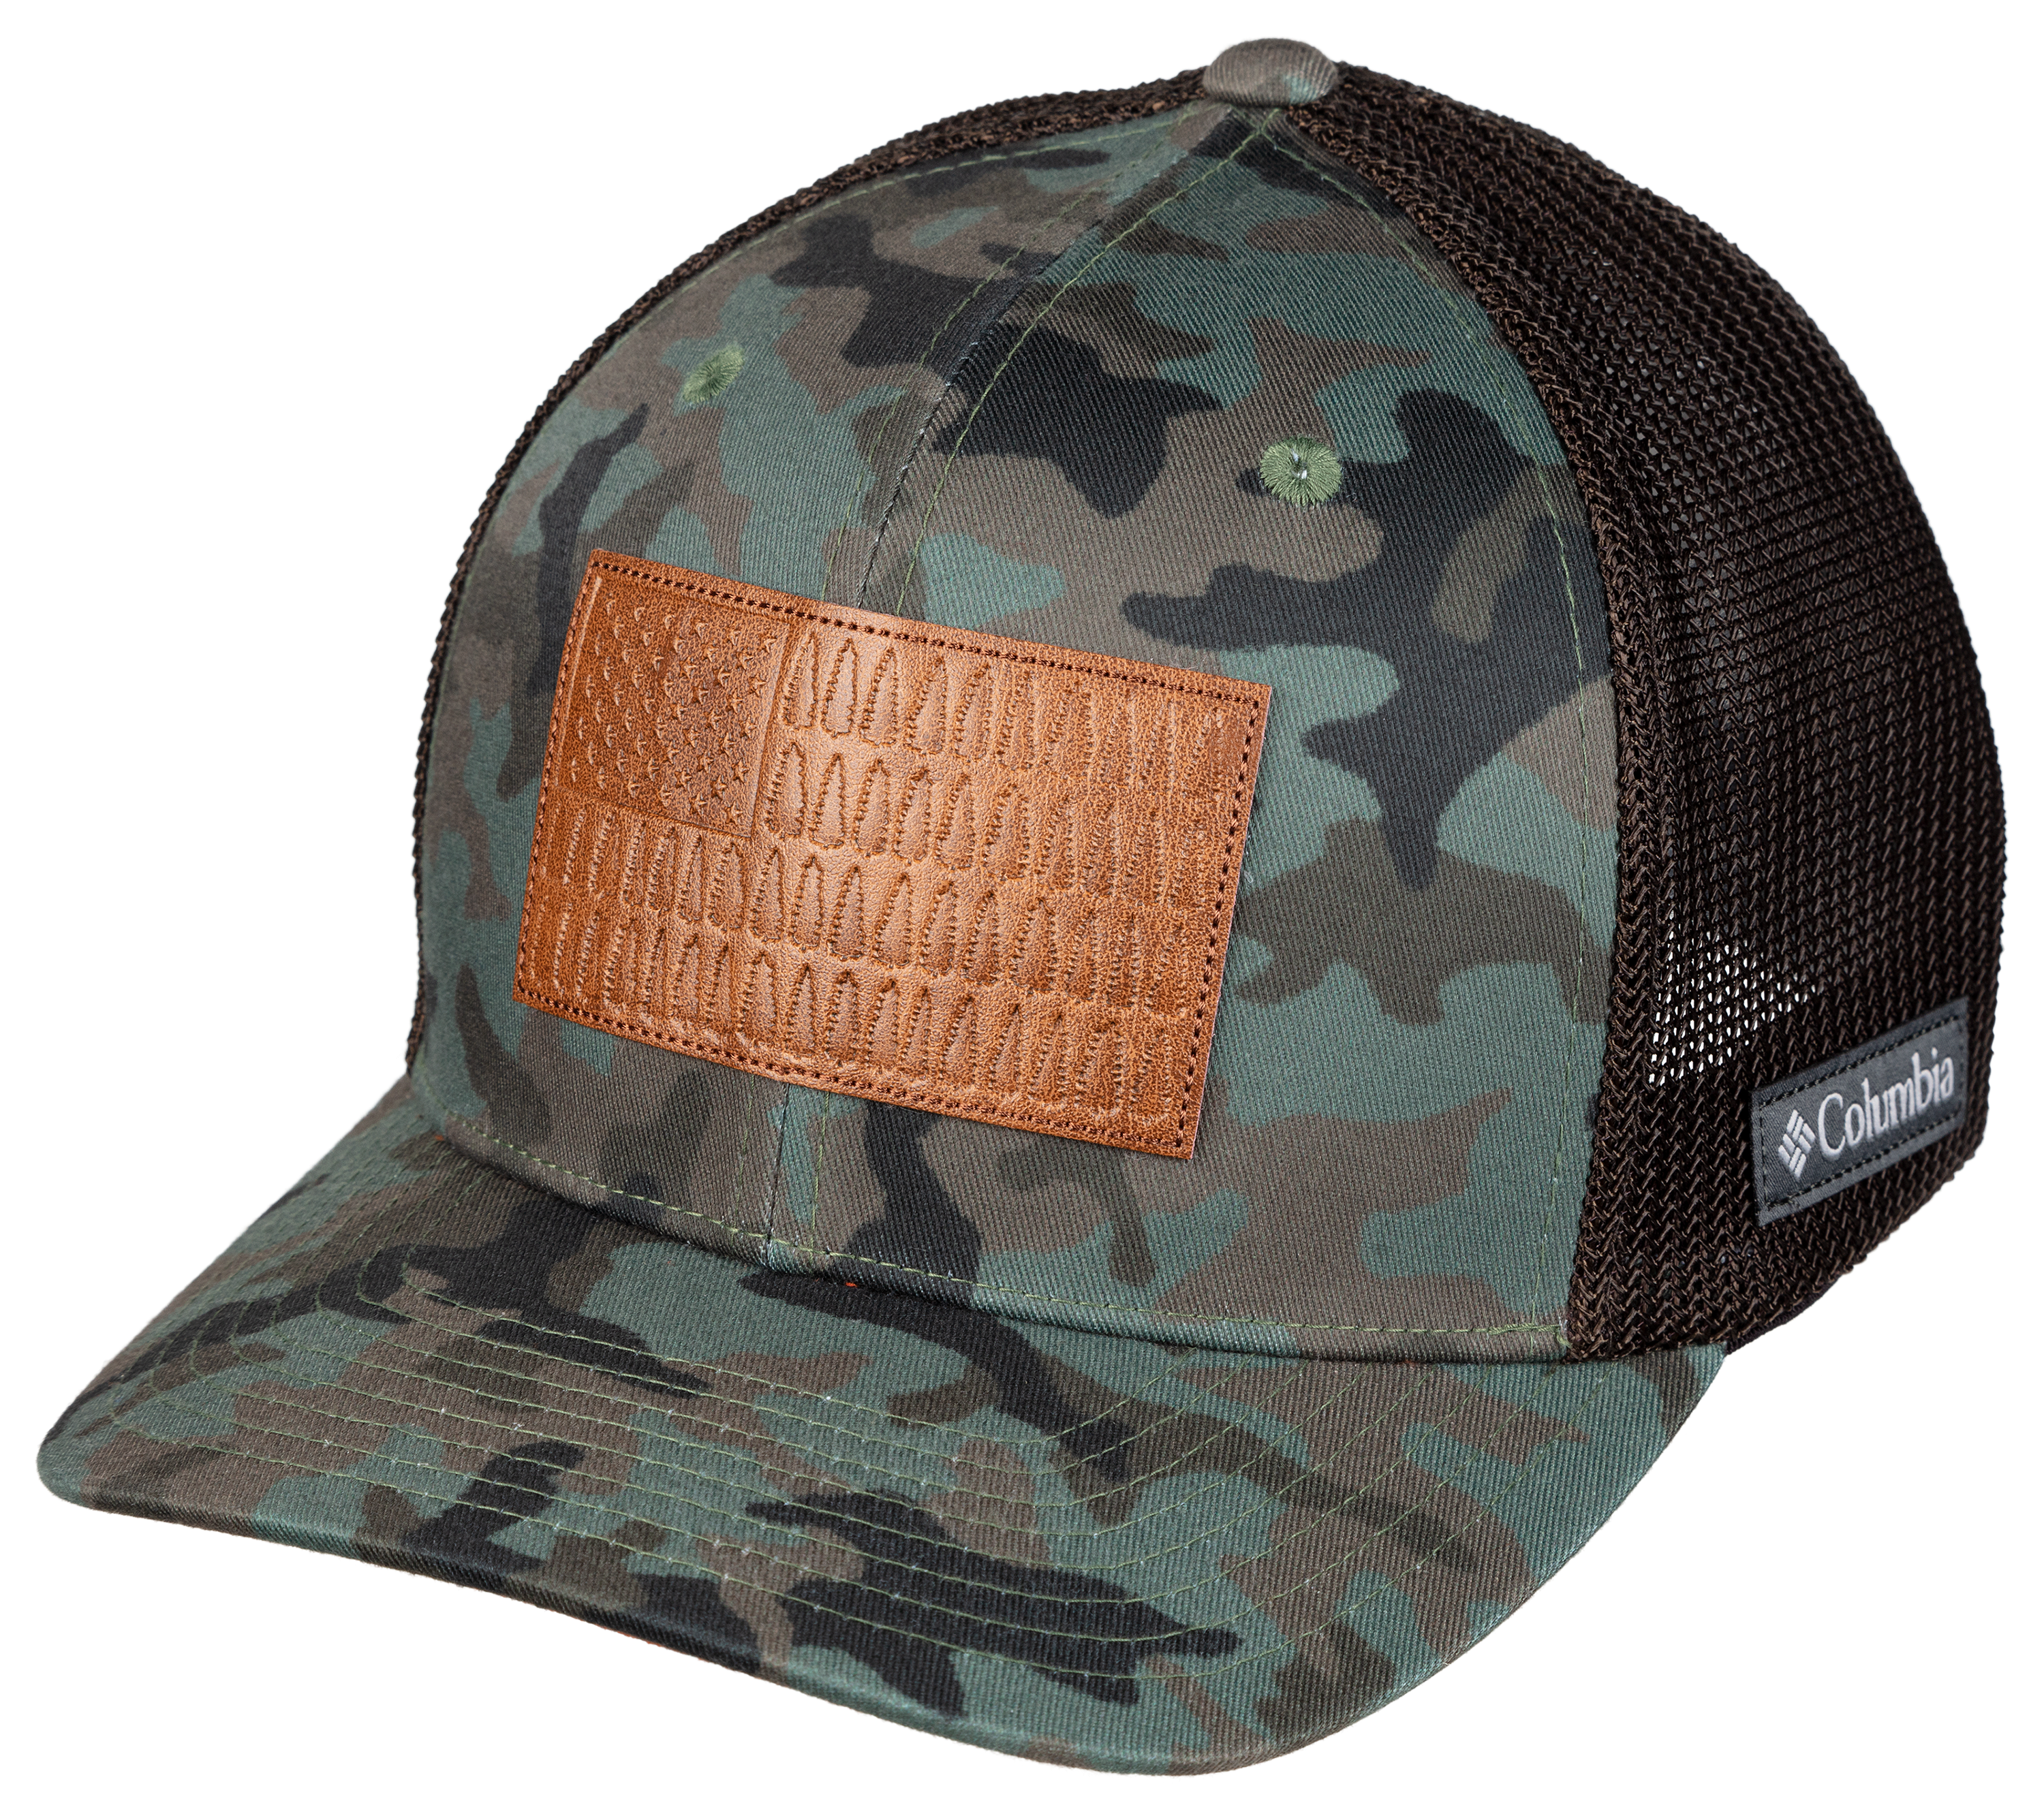 Adult Rugged Outdoor Mesh Cap